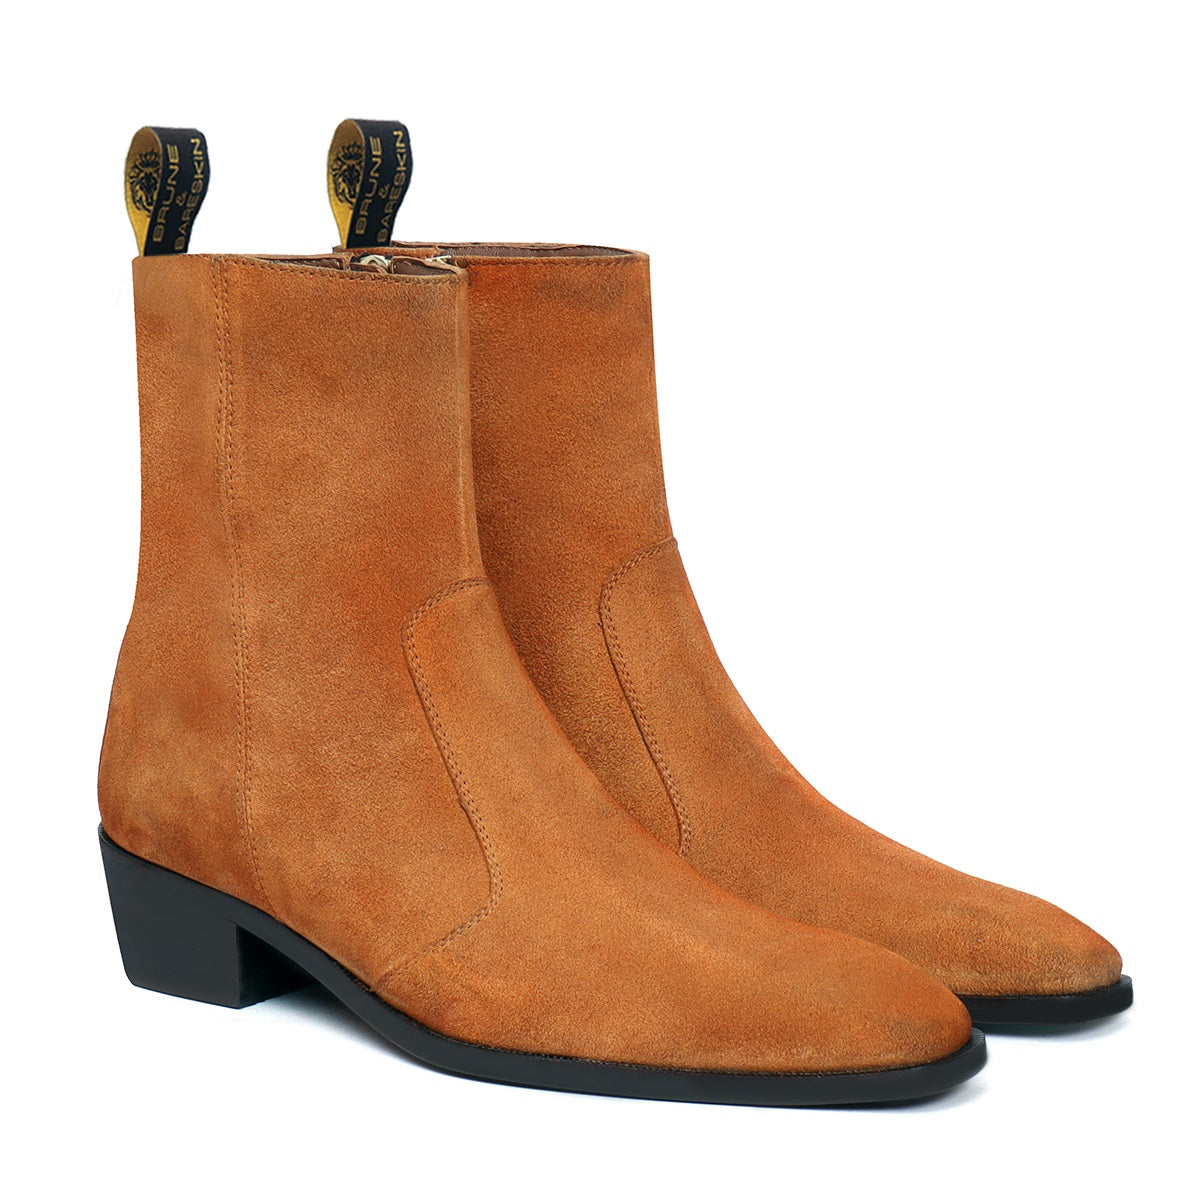 Camel Suede Leather Cuban Heel Boot with Zip Closure